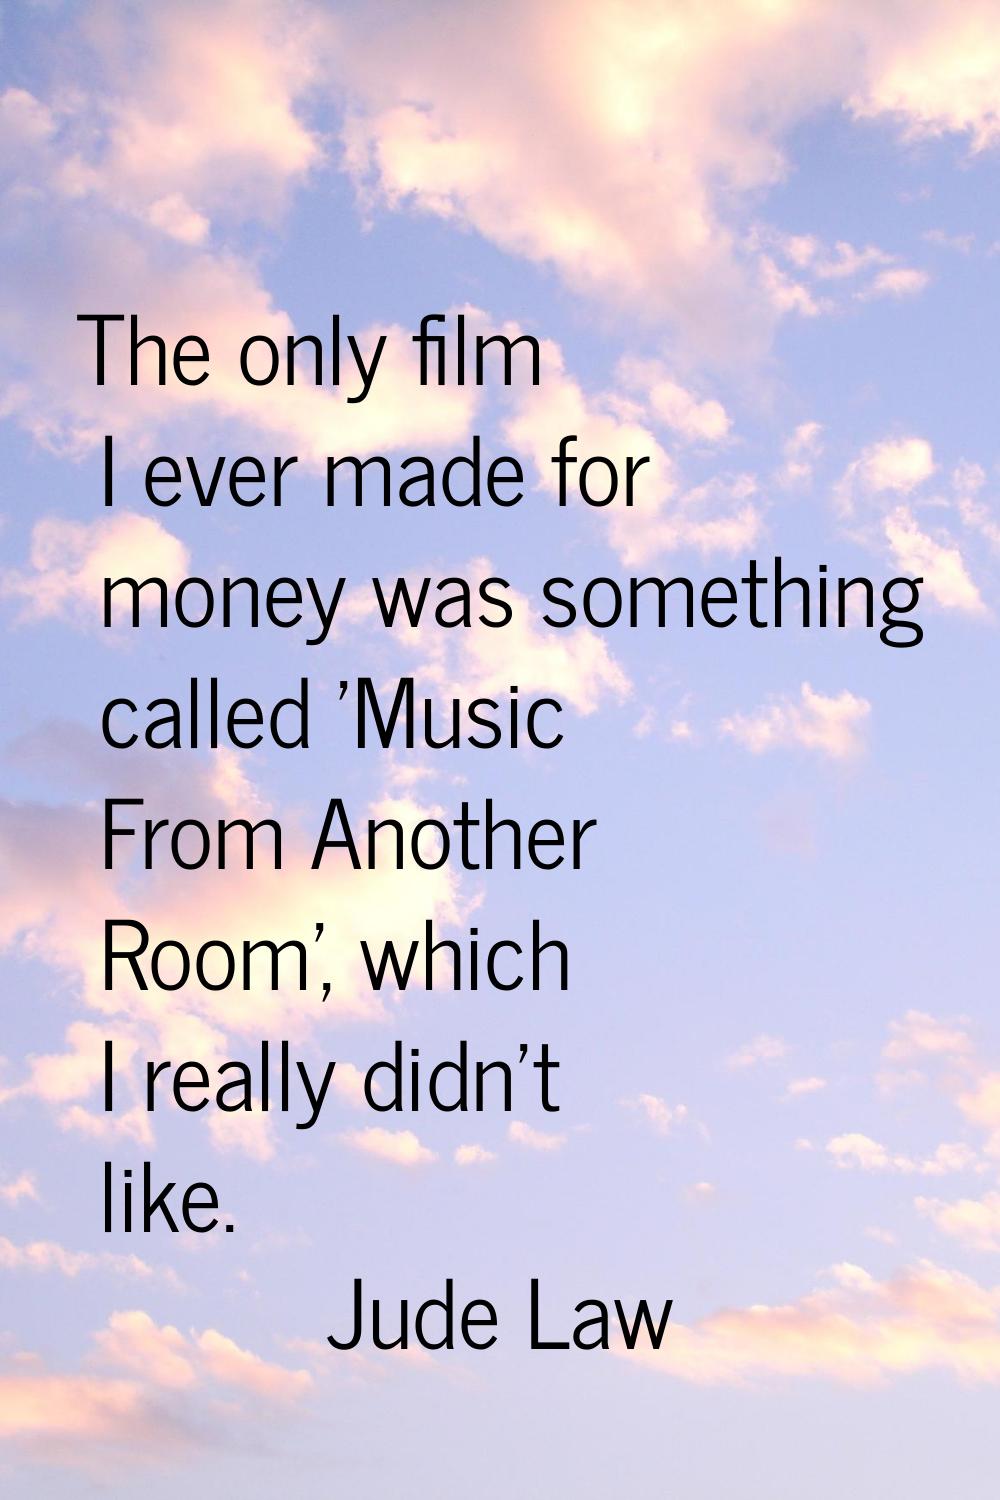 The only film I ever made for money was something called 'Music From Another Room', which I really 